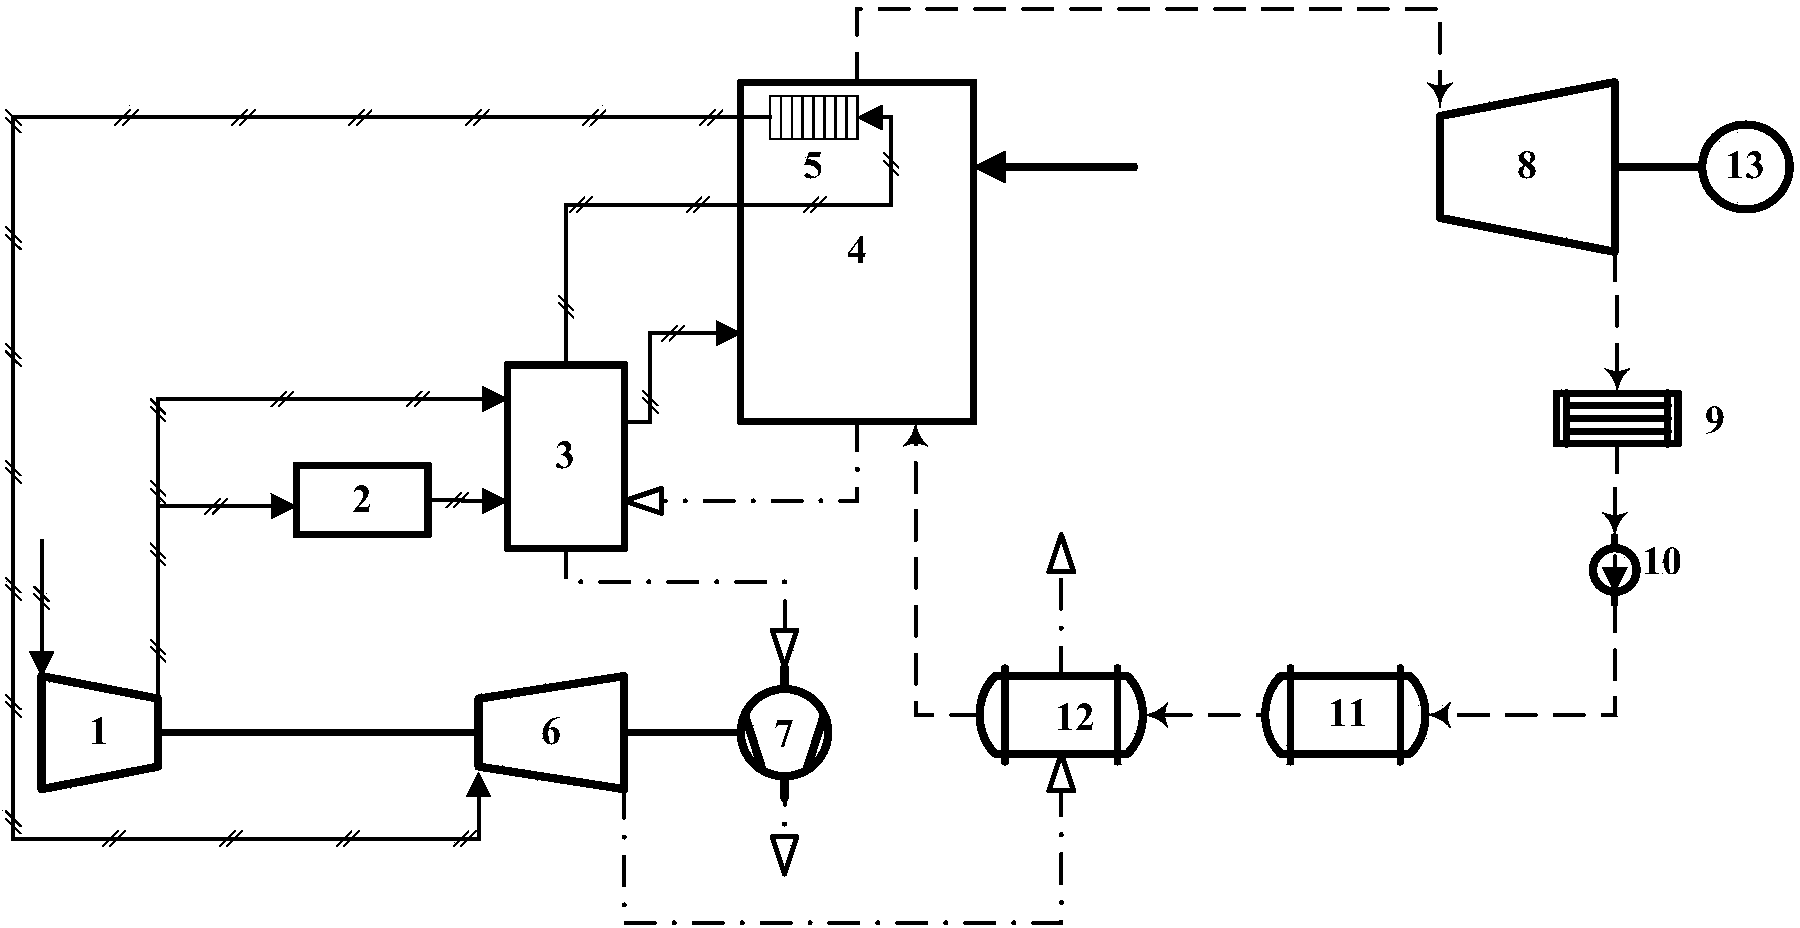 Integrated oxygen-enriched combustion power system